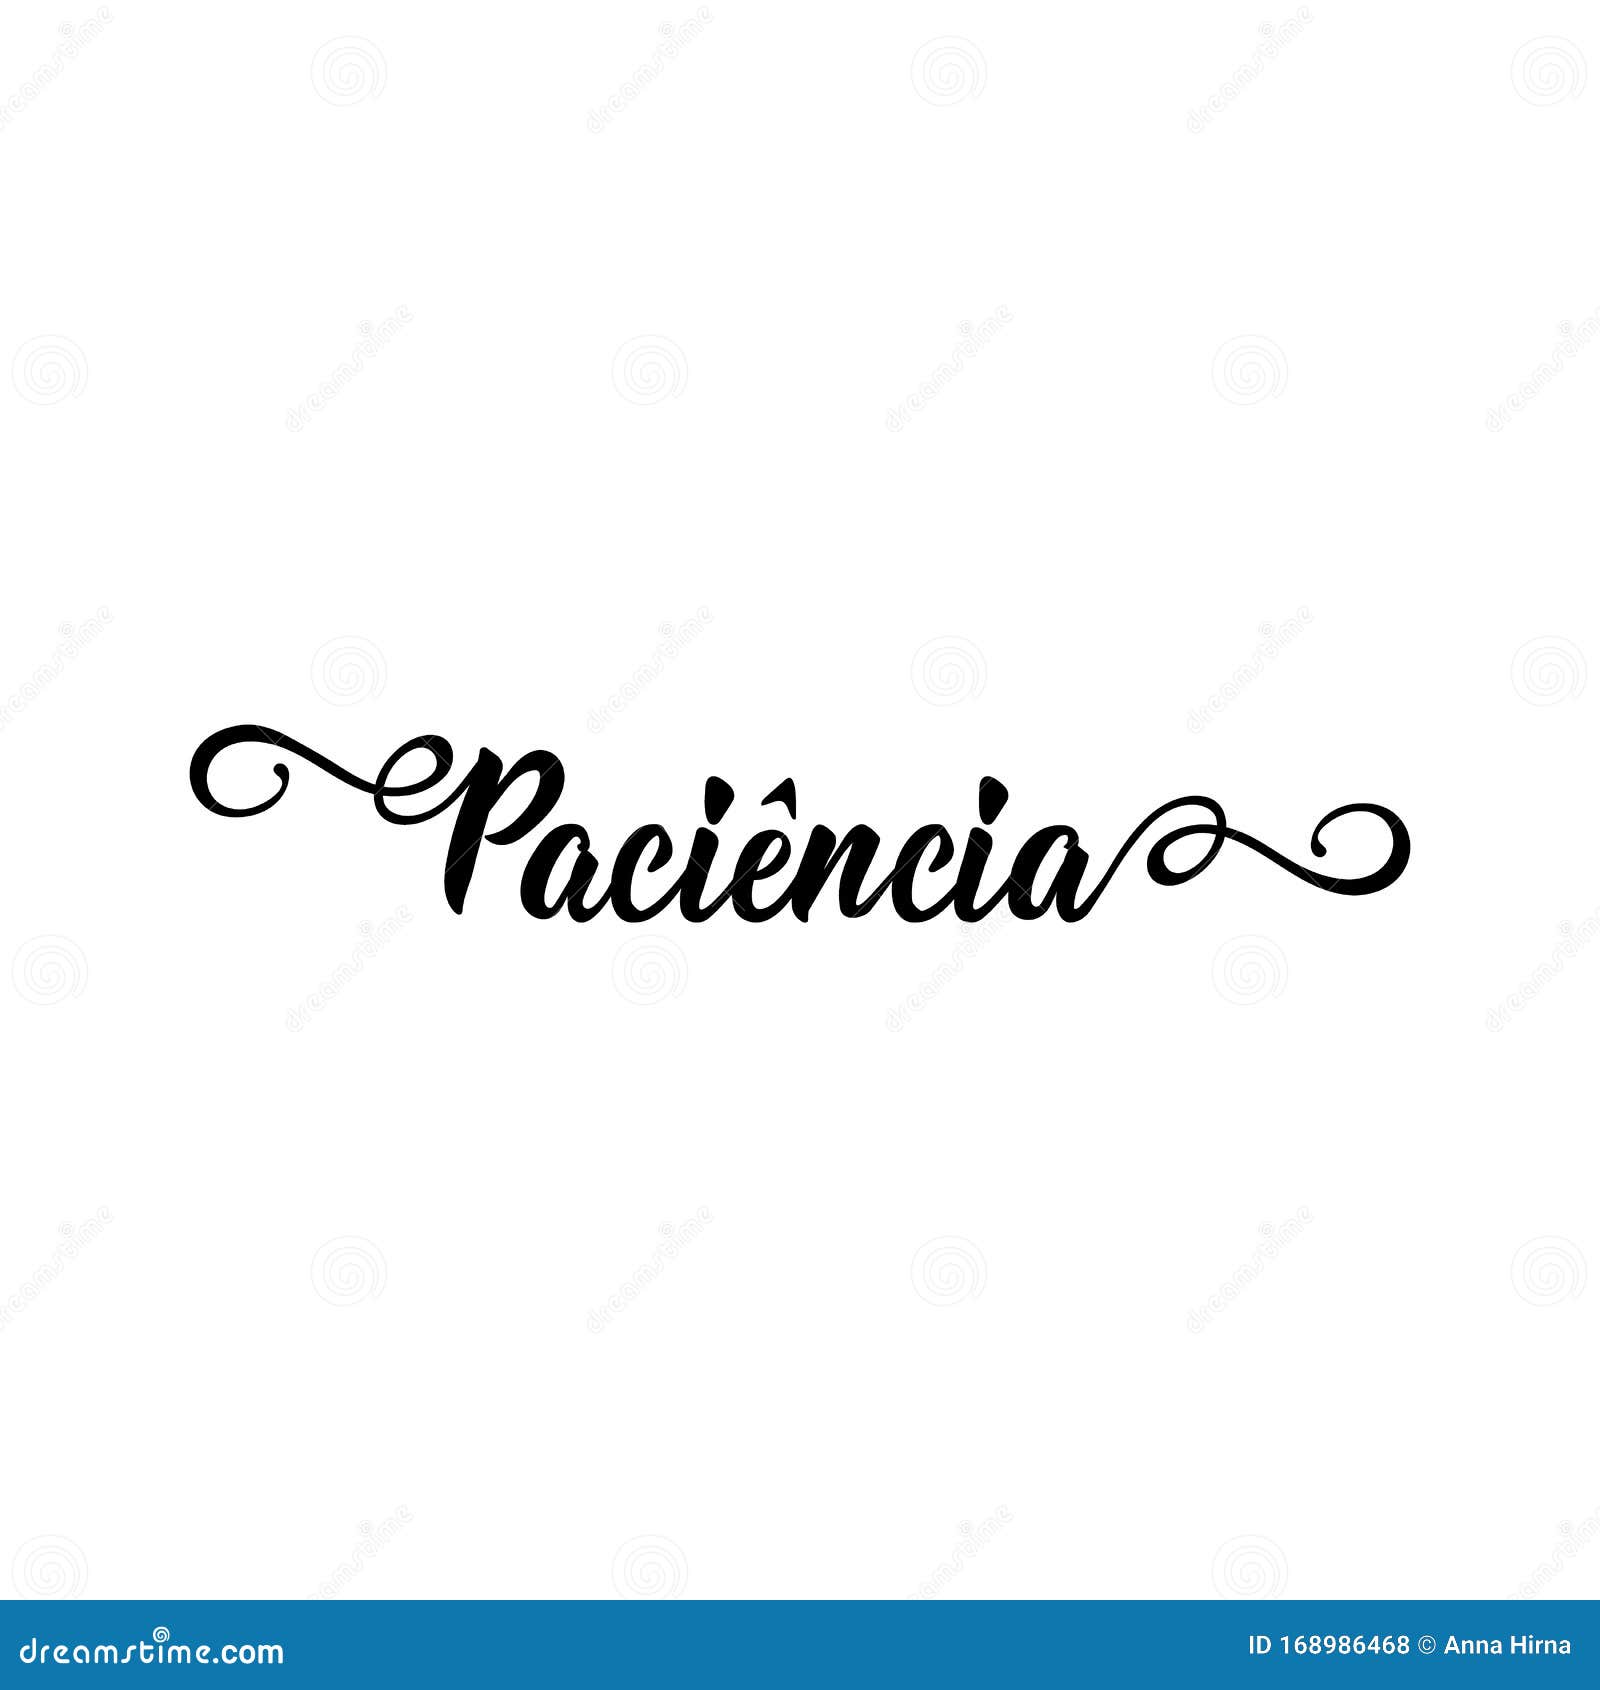 patience - in spanish. lettering. ink . modern brush calligraphy.